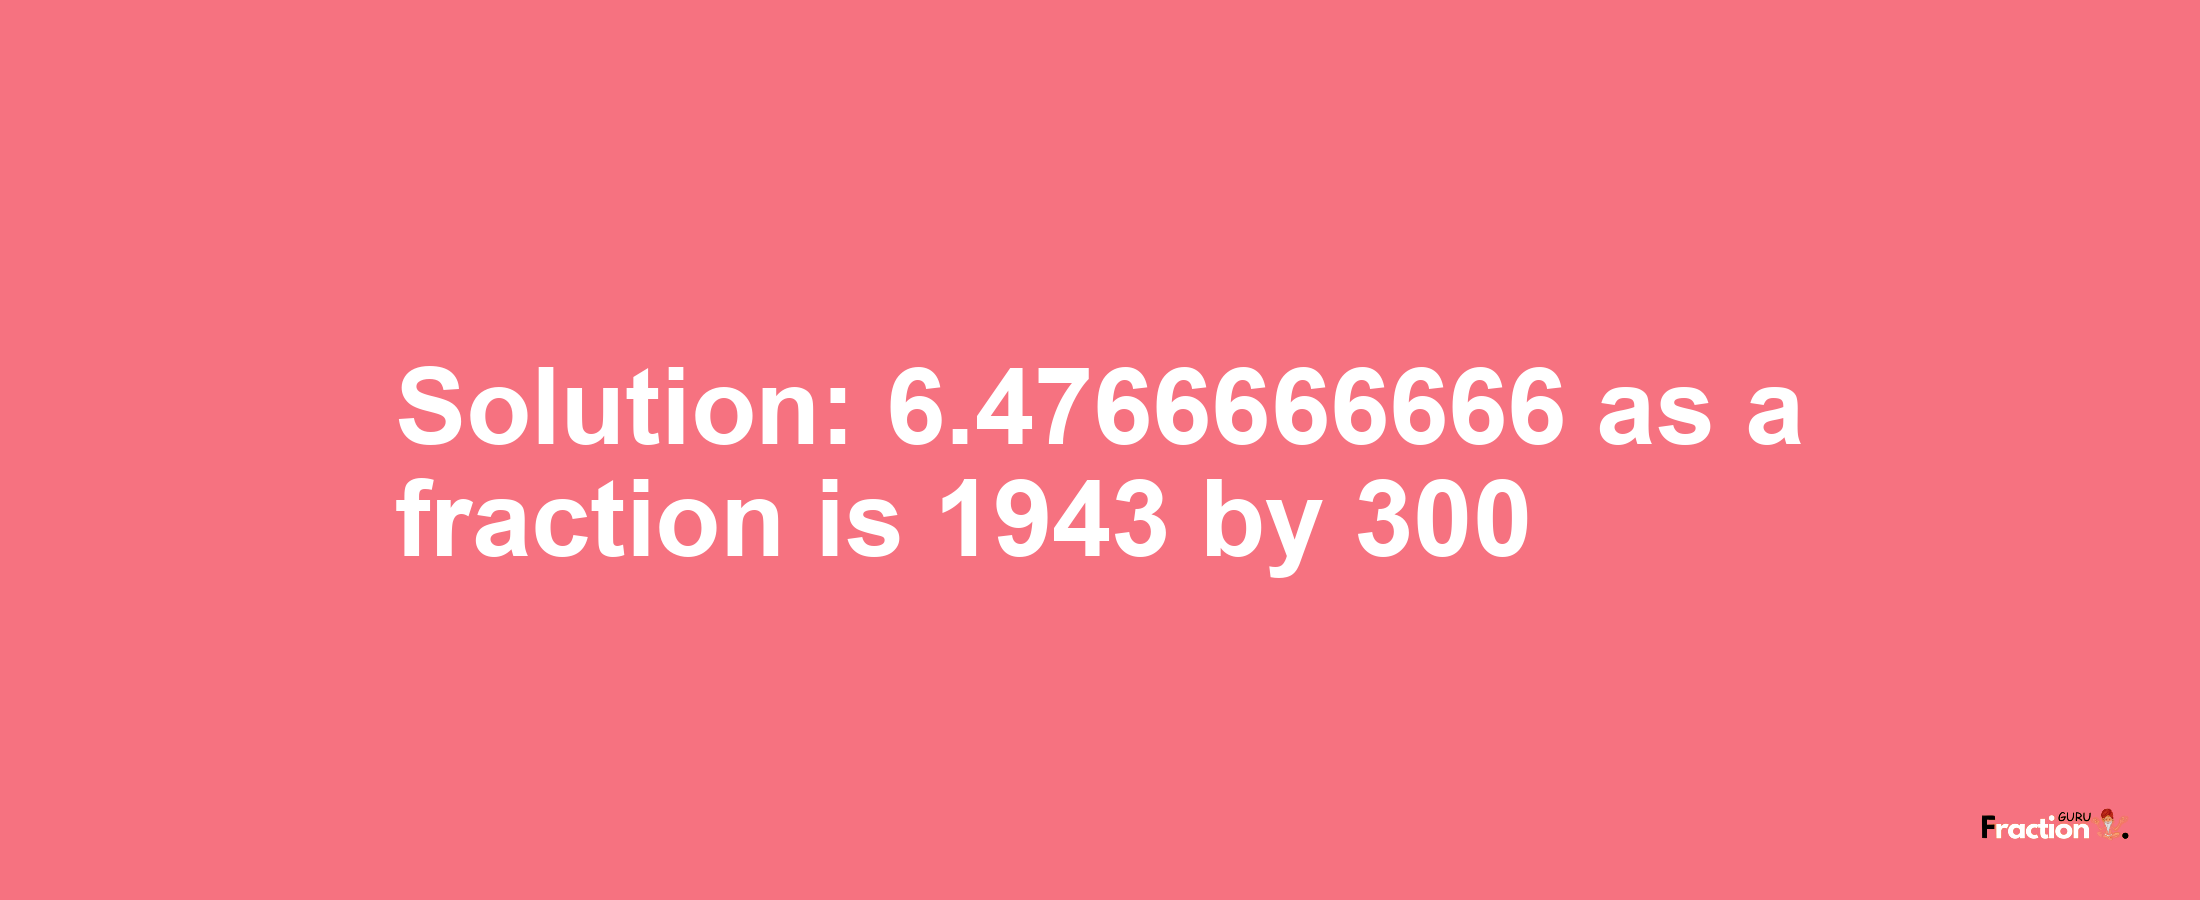 Solution:6.4766666666 as a fraction is 1943/300